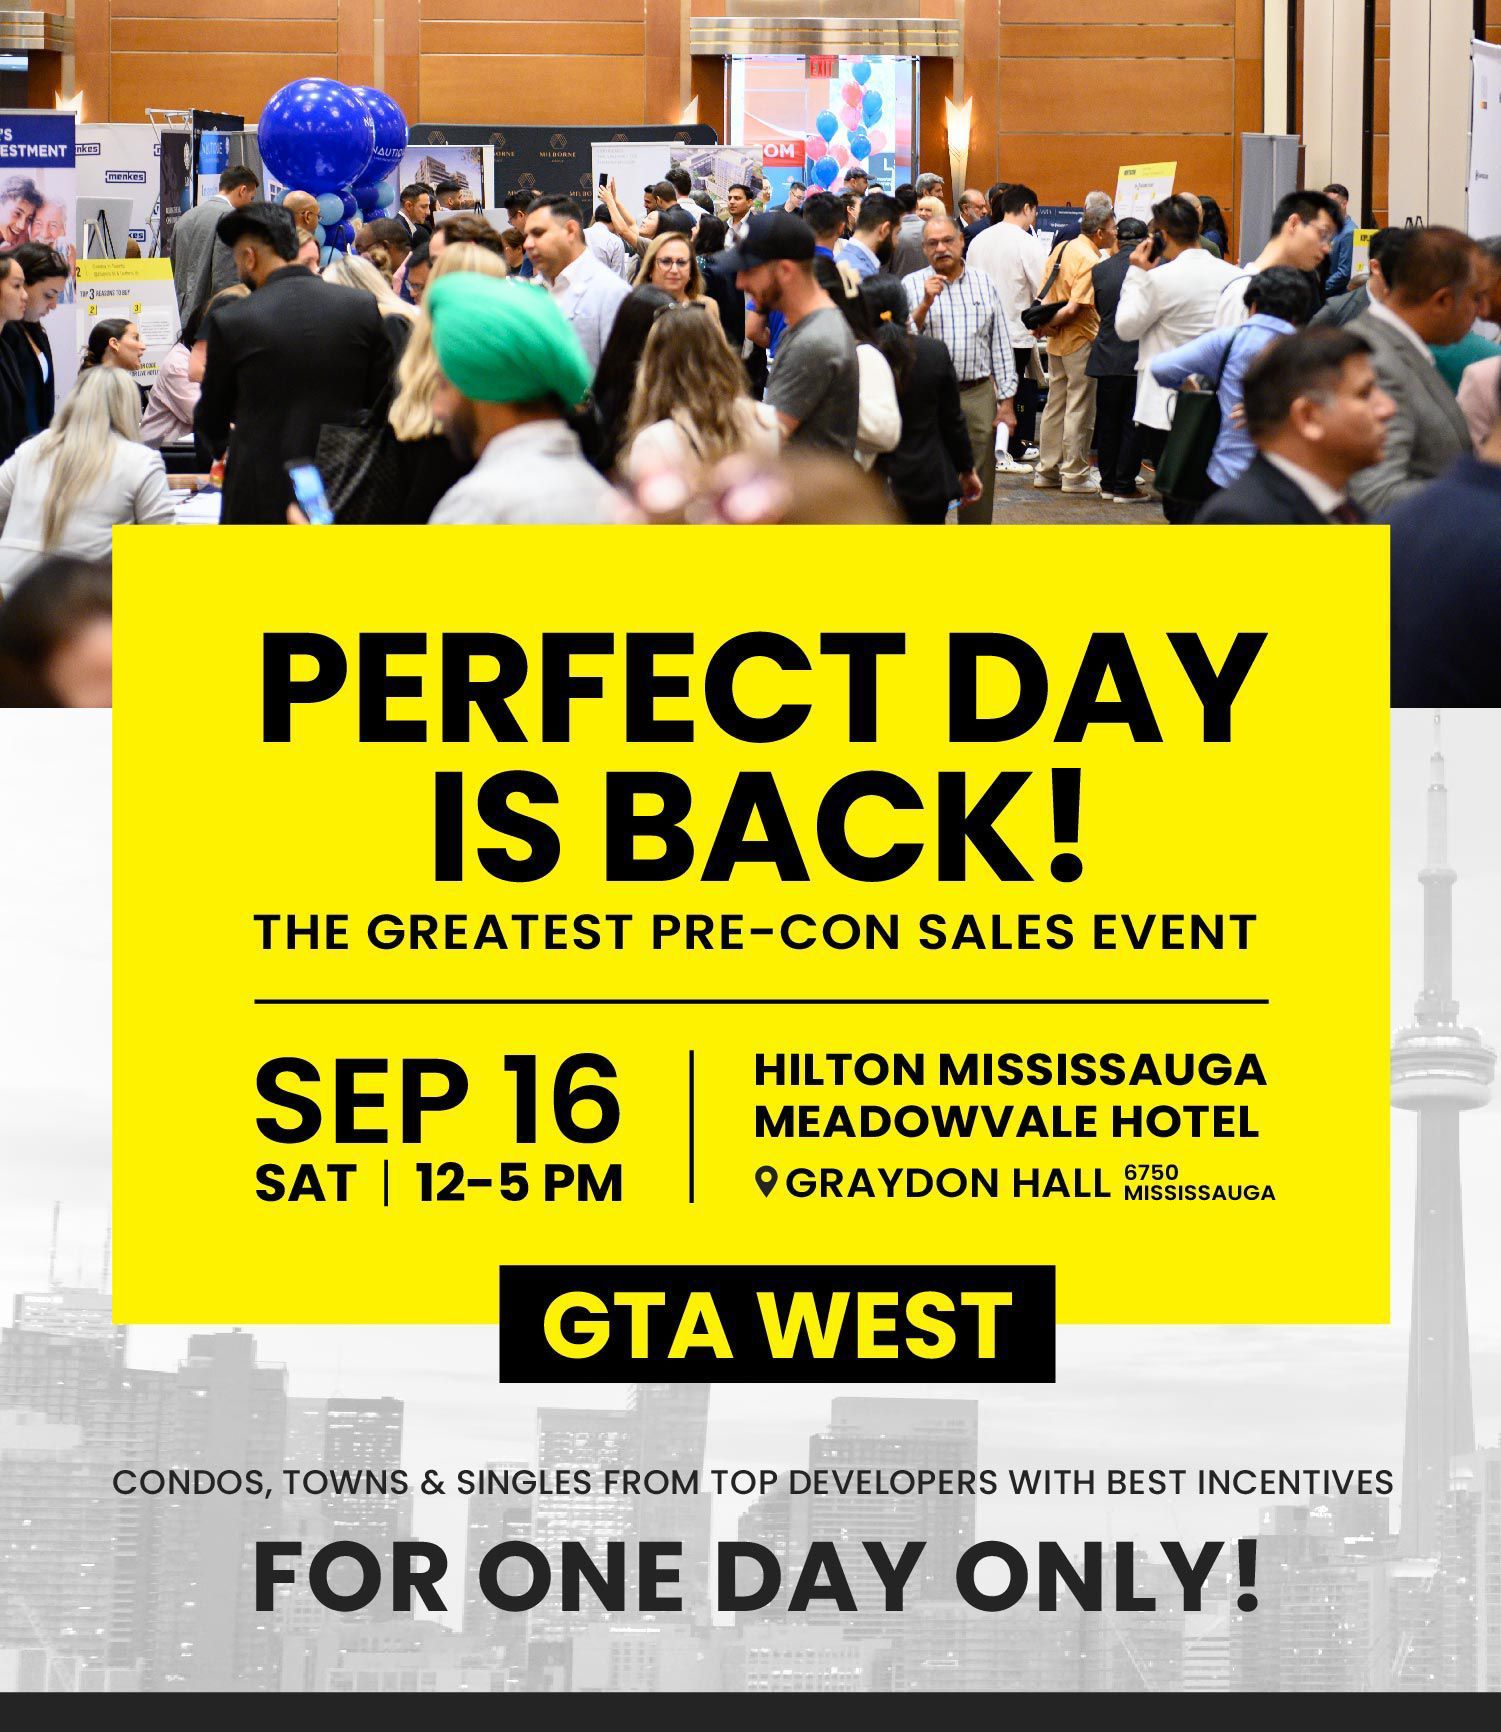 Perfect Day sales event in Mississauga